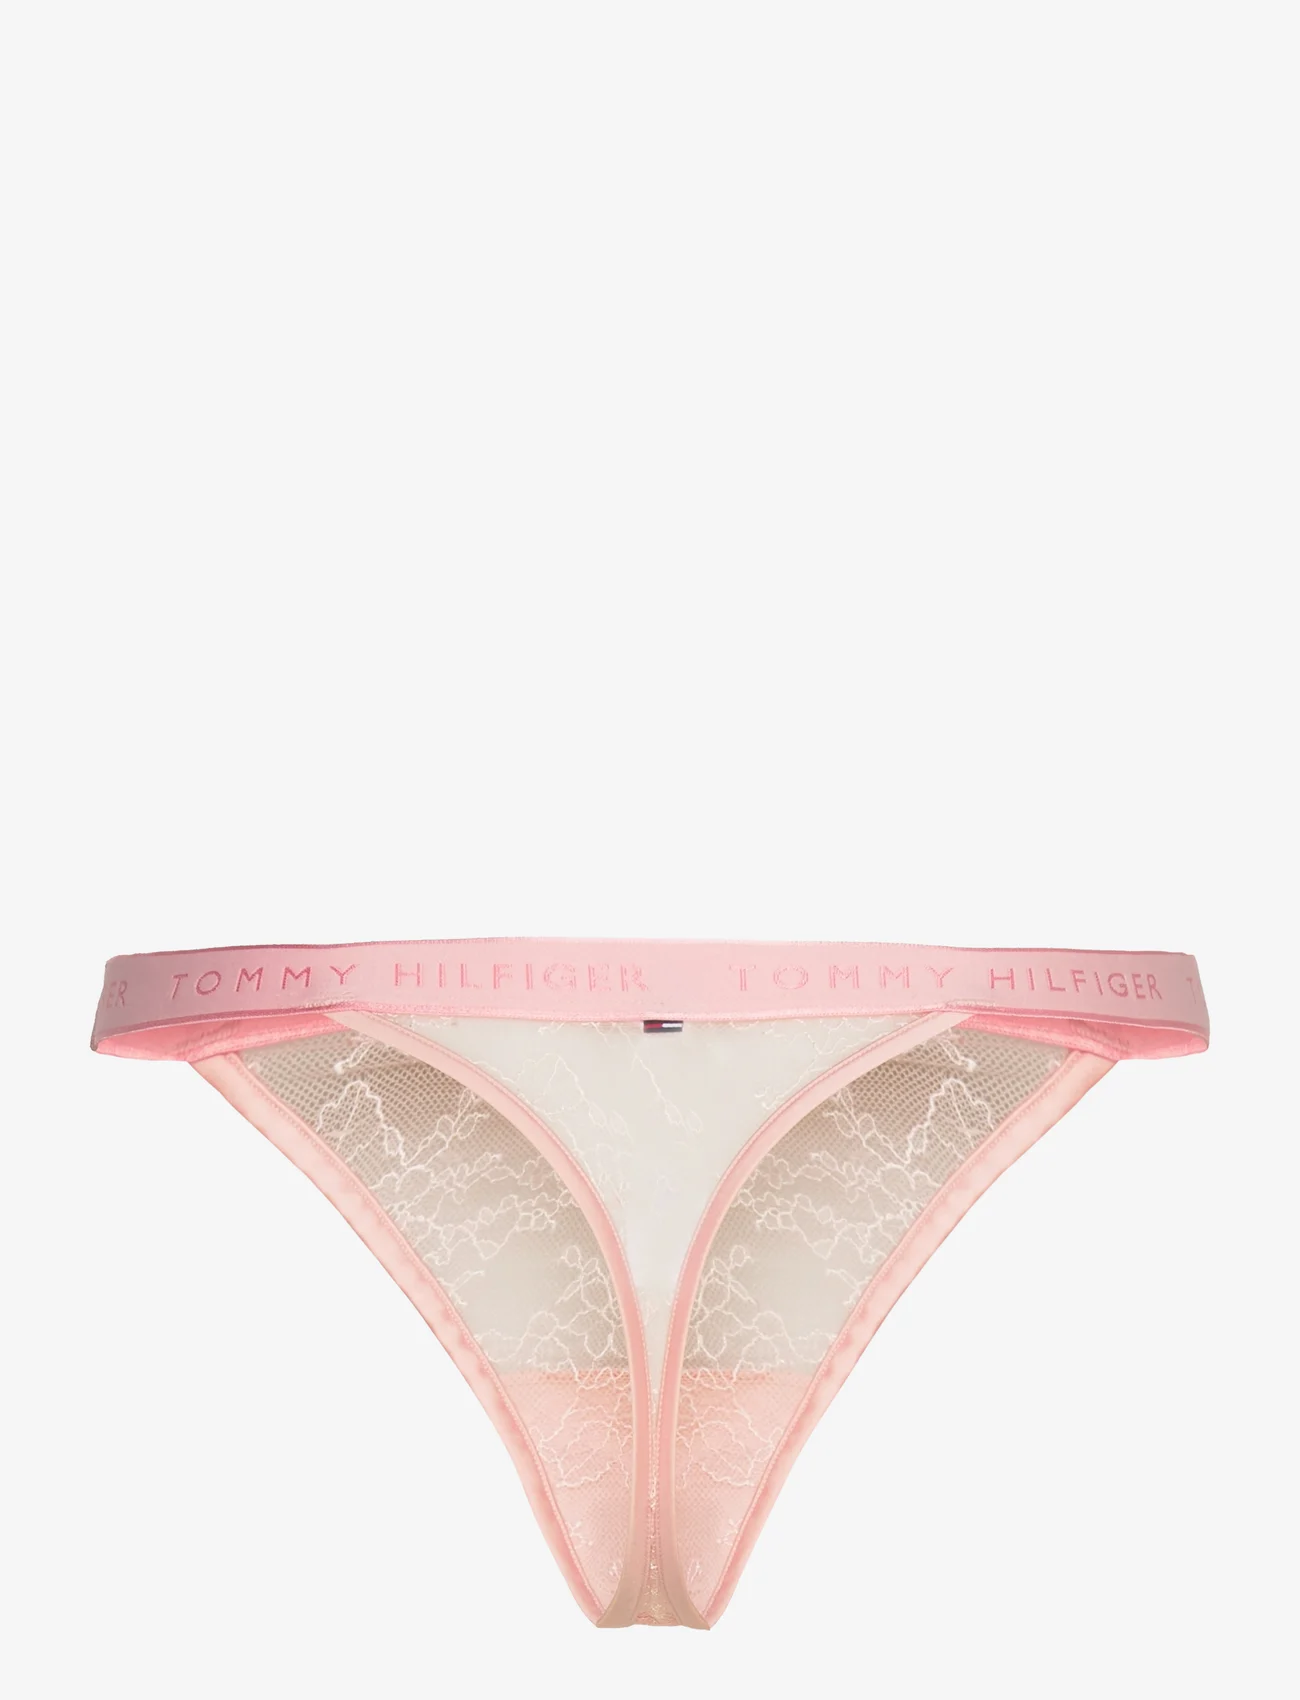 Tommy Hilfiger - TANGA - lowest prices - whimsy pink - 1